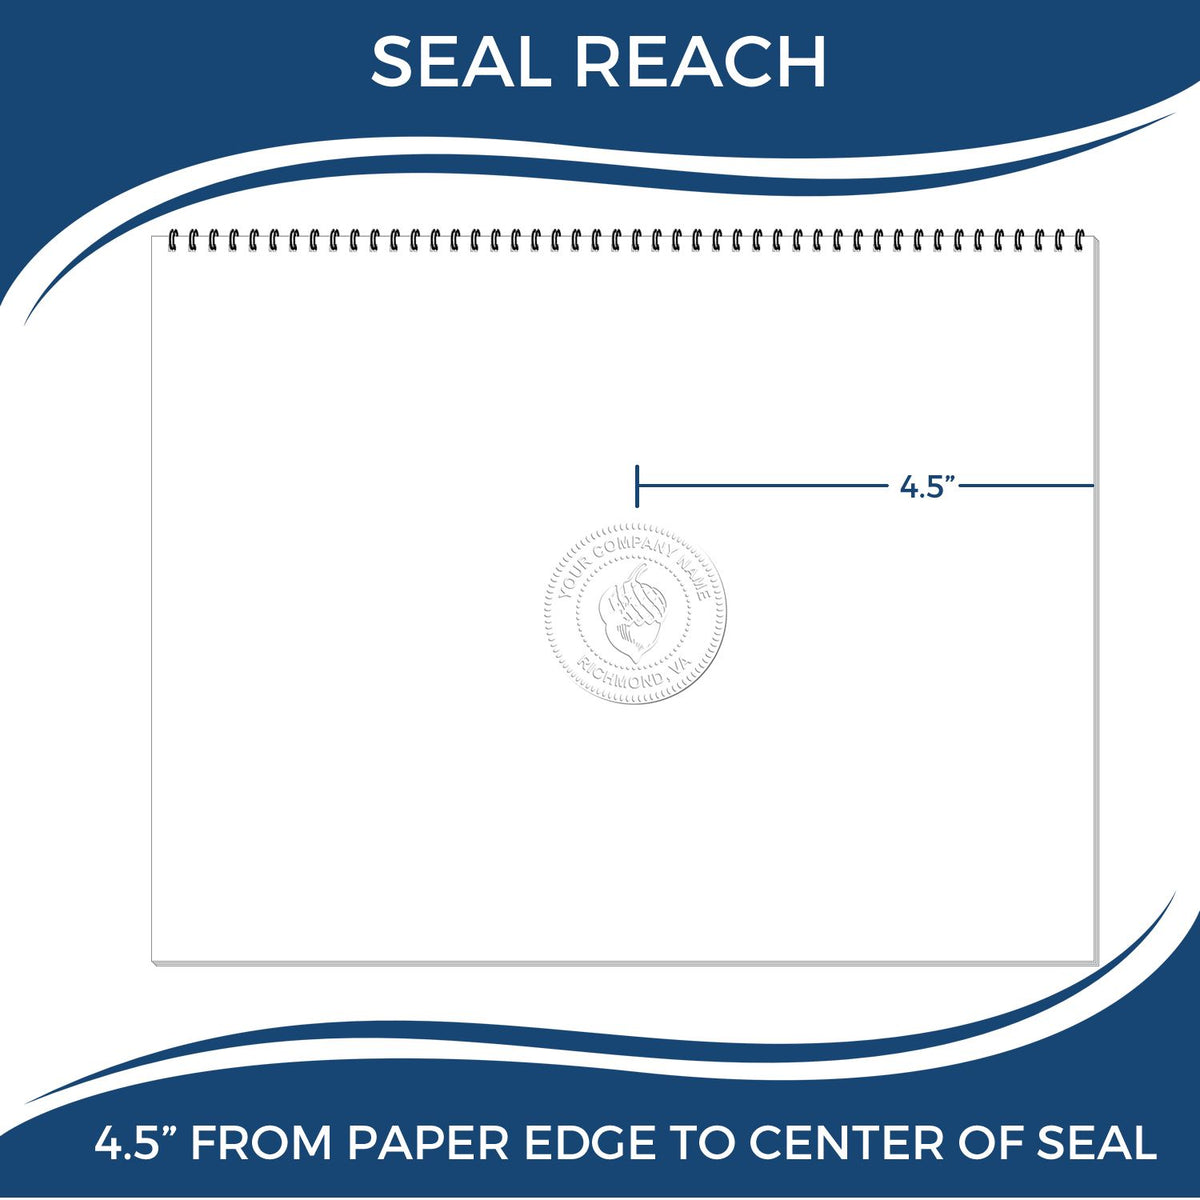 An infographic showing the seal reach which is represented by a ruler and a miniature seal image of the State of Pennsylvania Extended Long Reach Engineer Seal